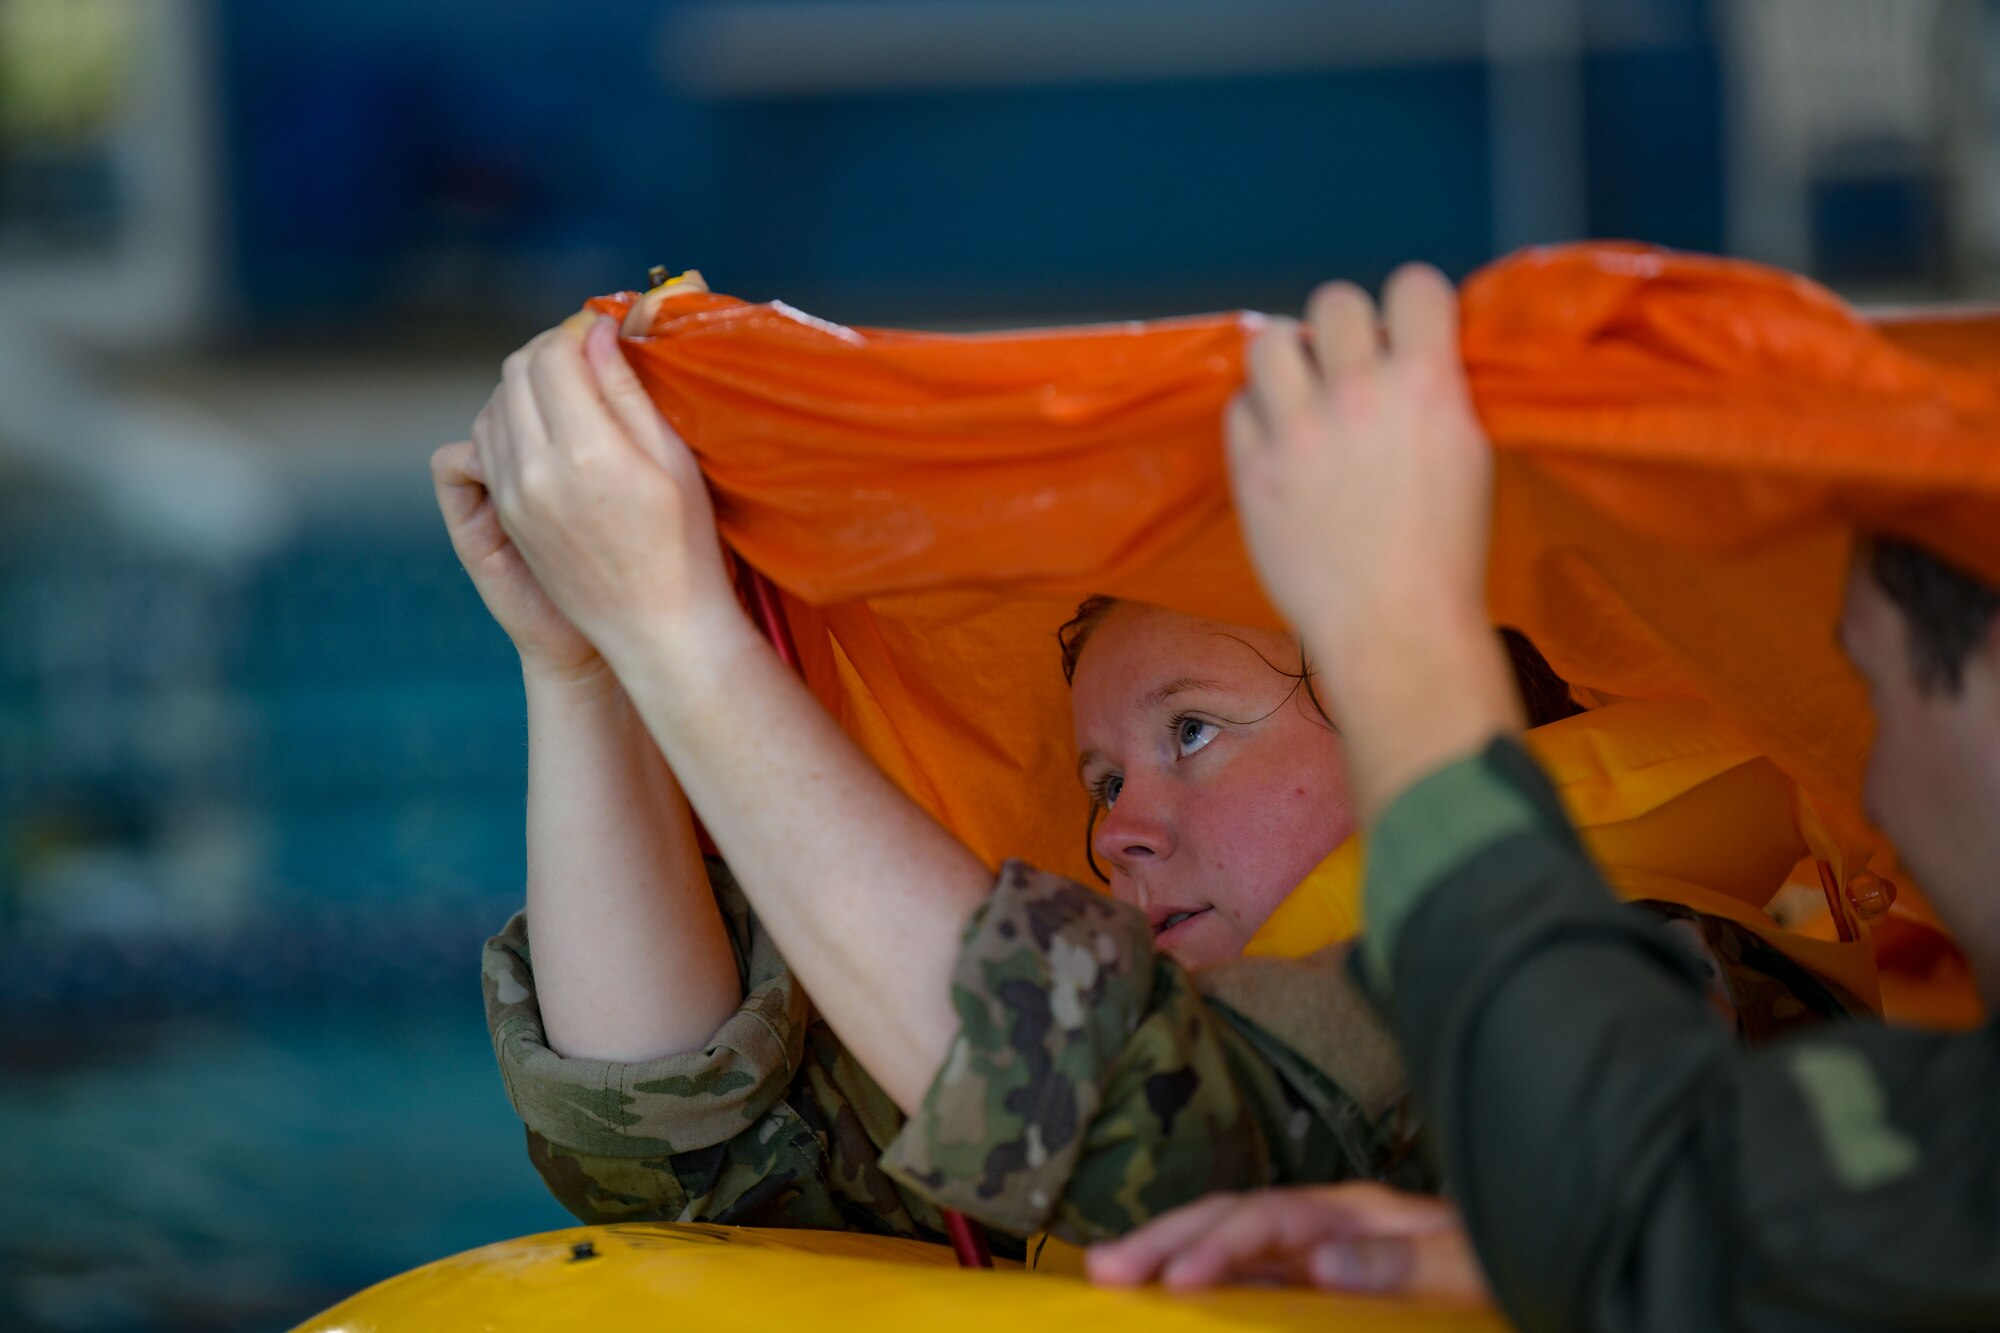 Airmen of the 183rd Airlift Squadron, Jackson, Mississippi, conducted water survival training, a necessity for aircrews operating in a global airlift capacity, April 1-3, 2023. Ultimately, the preparedness instilled by this type of training will affect other aspects of an Airman’s life and career, keeping them ready to overcome any obstacle. (U.S. Air National Guard photo by Staff Sgt. Jared Bounds.)